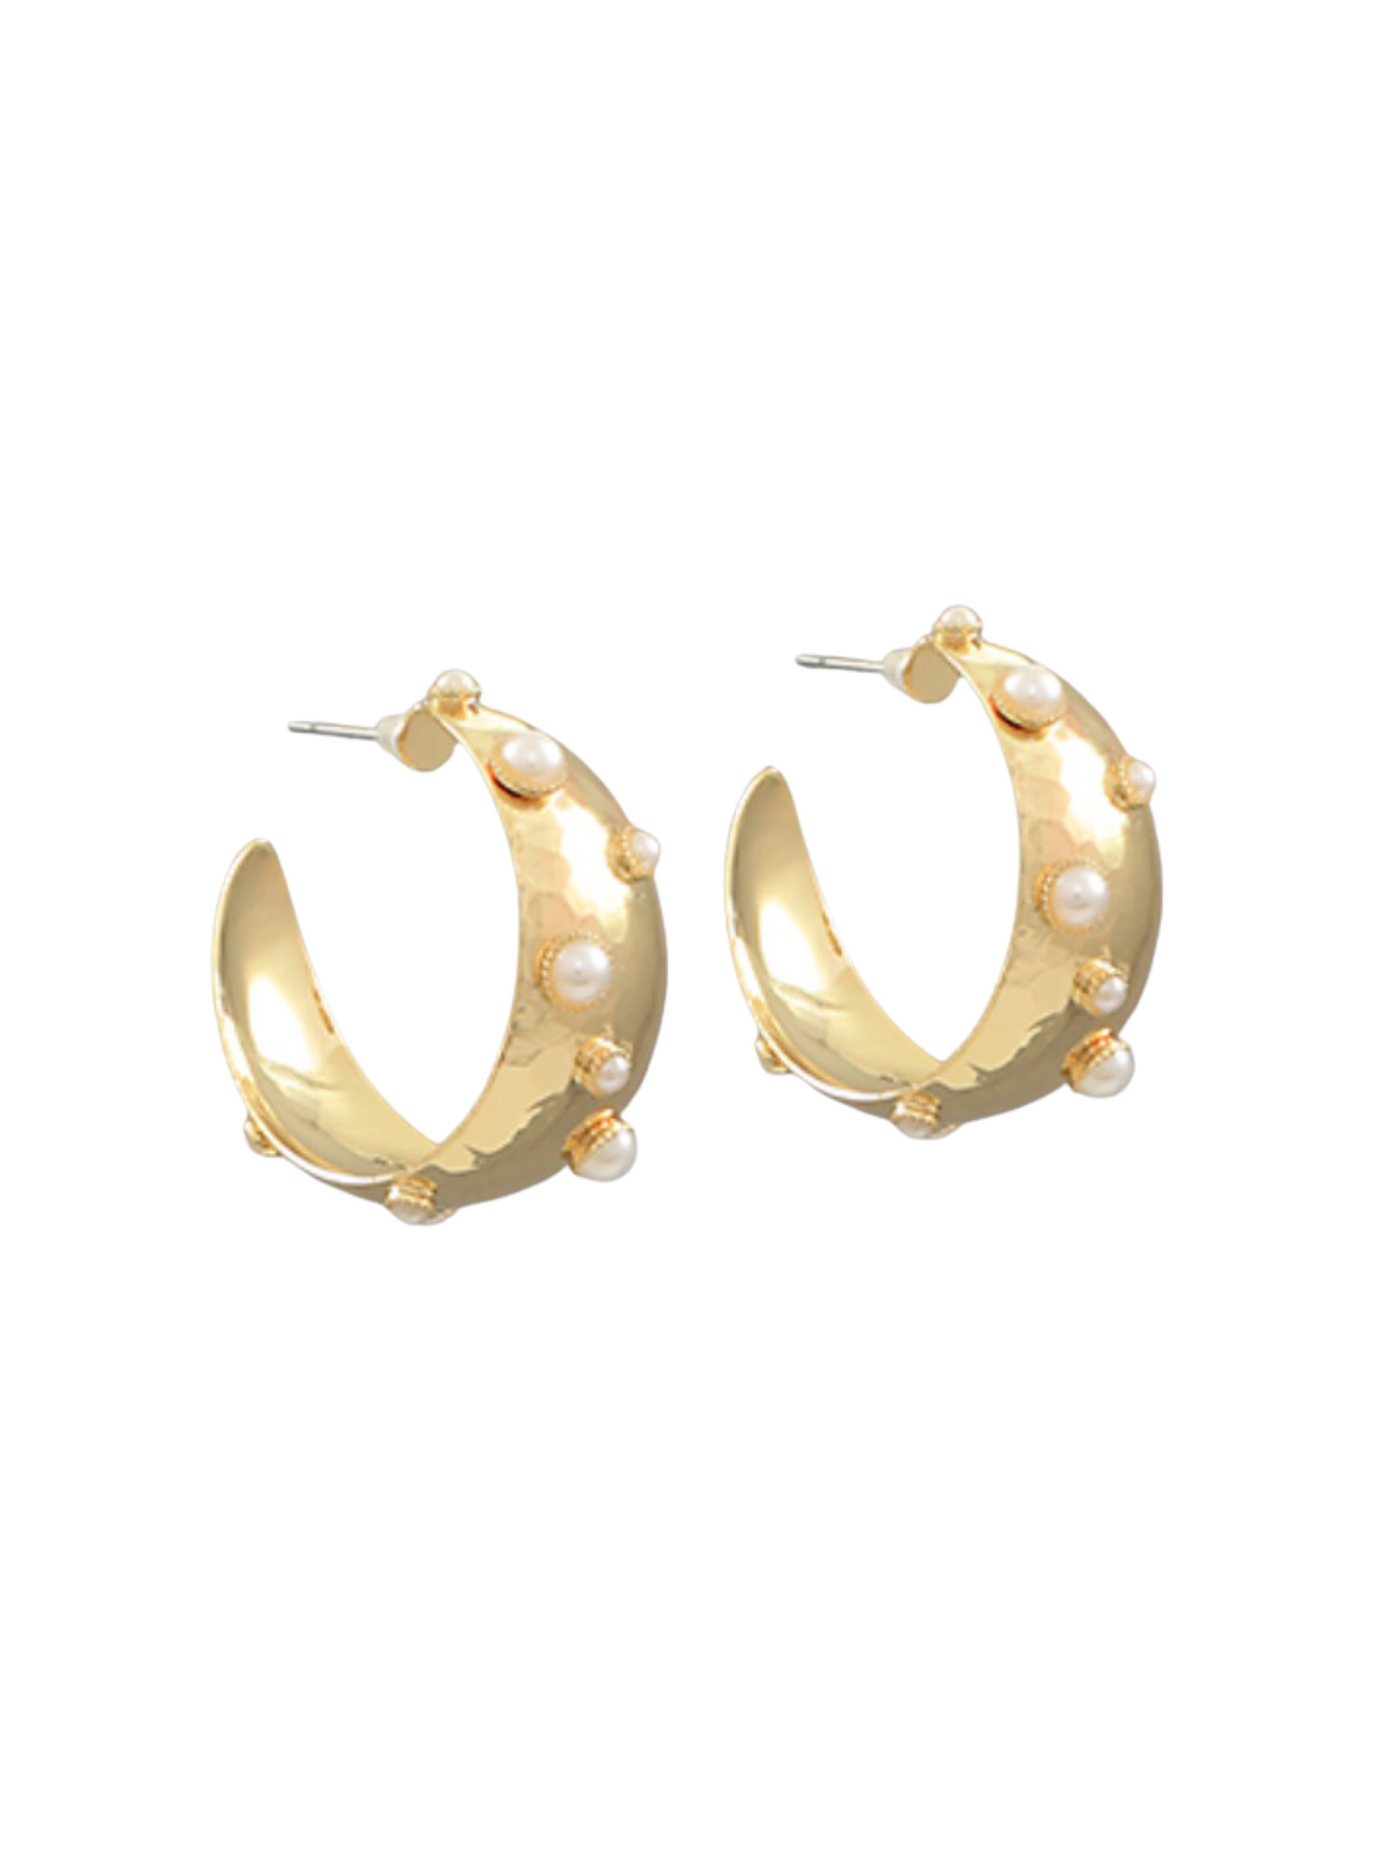 Pearl Studded Chunky Hoops on white background.